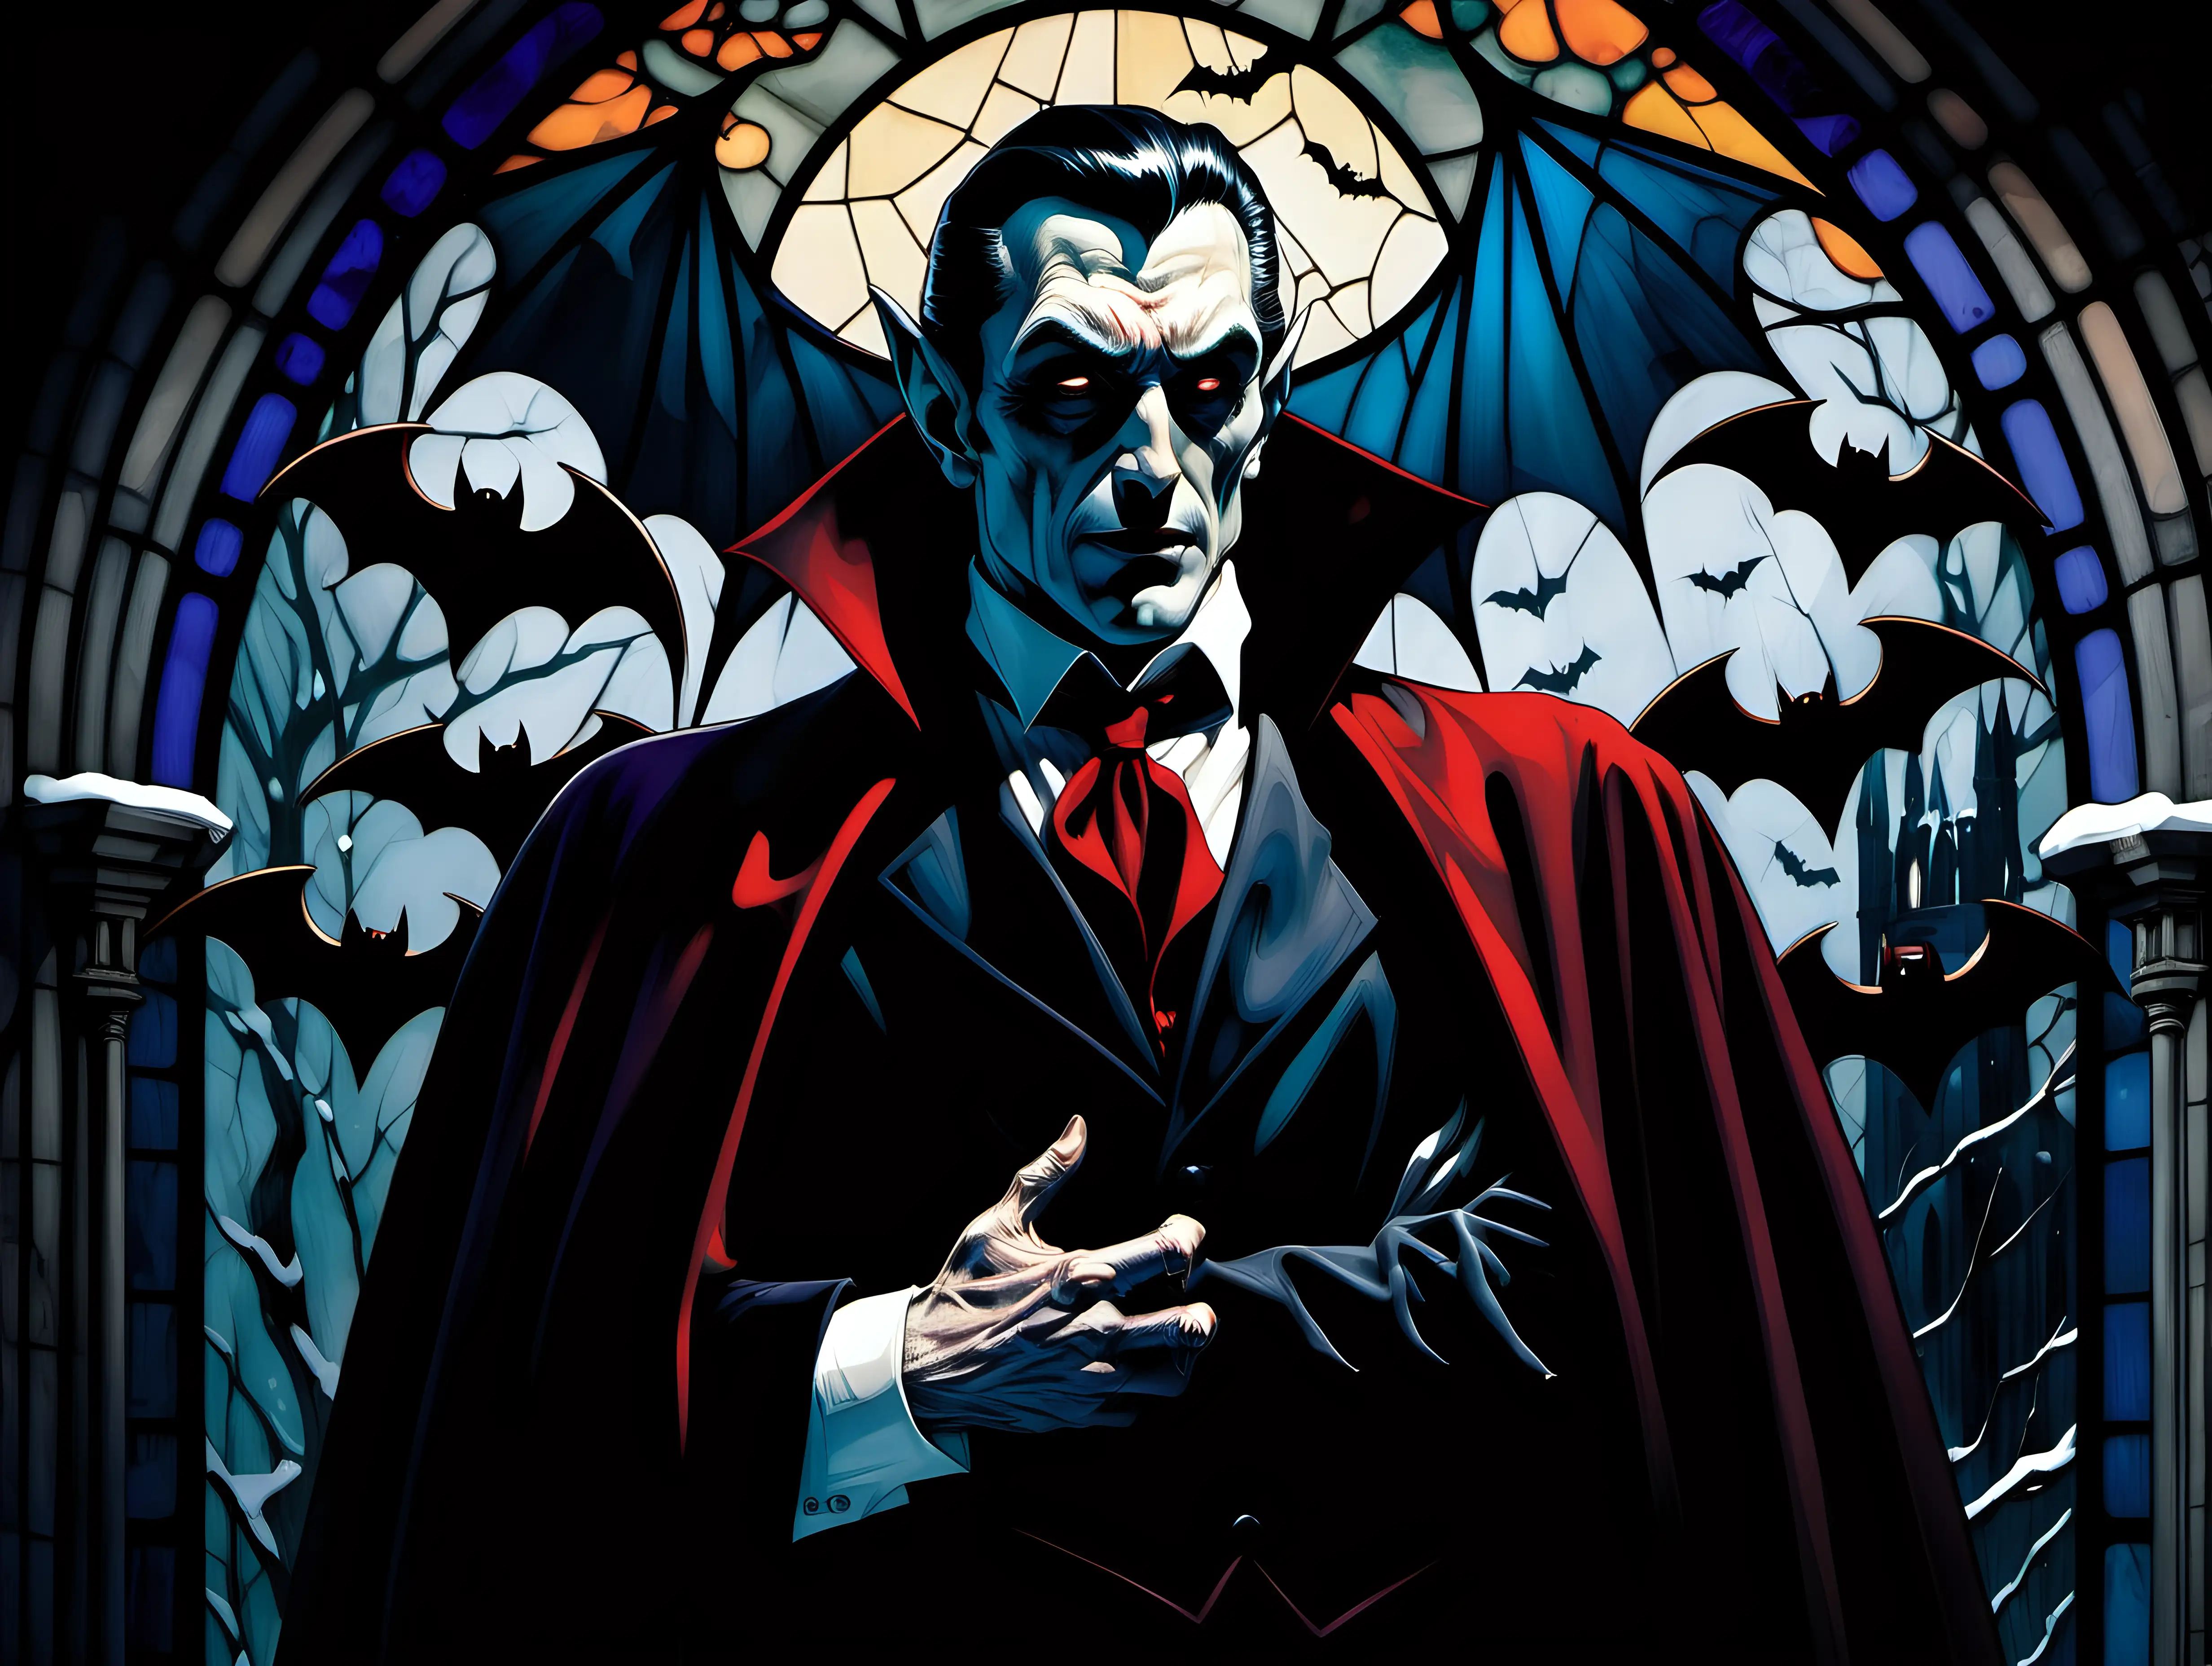 Dracula in front of a stained glass window with vampire bats outside in winter Frank Frazetta style